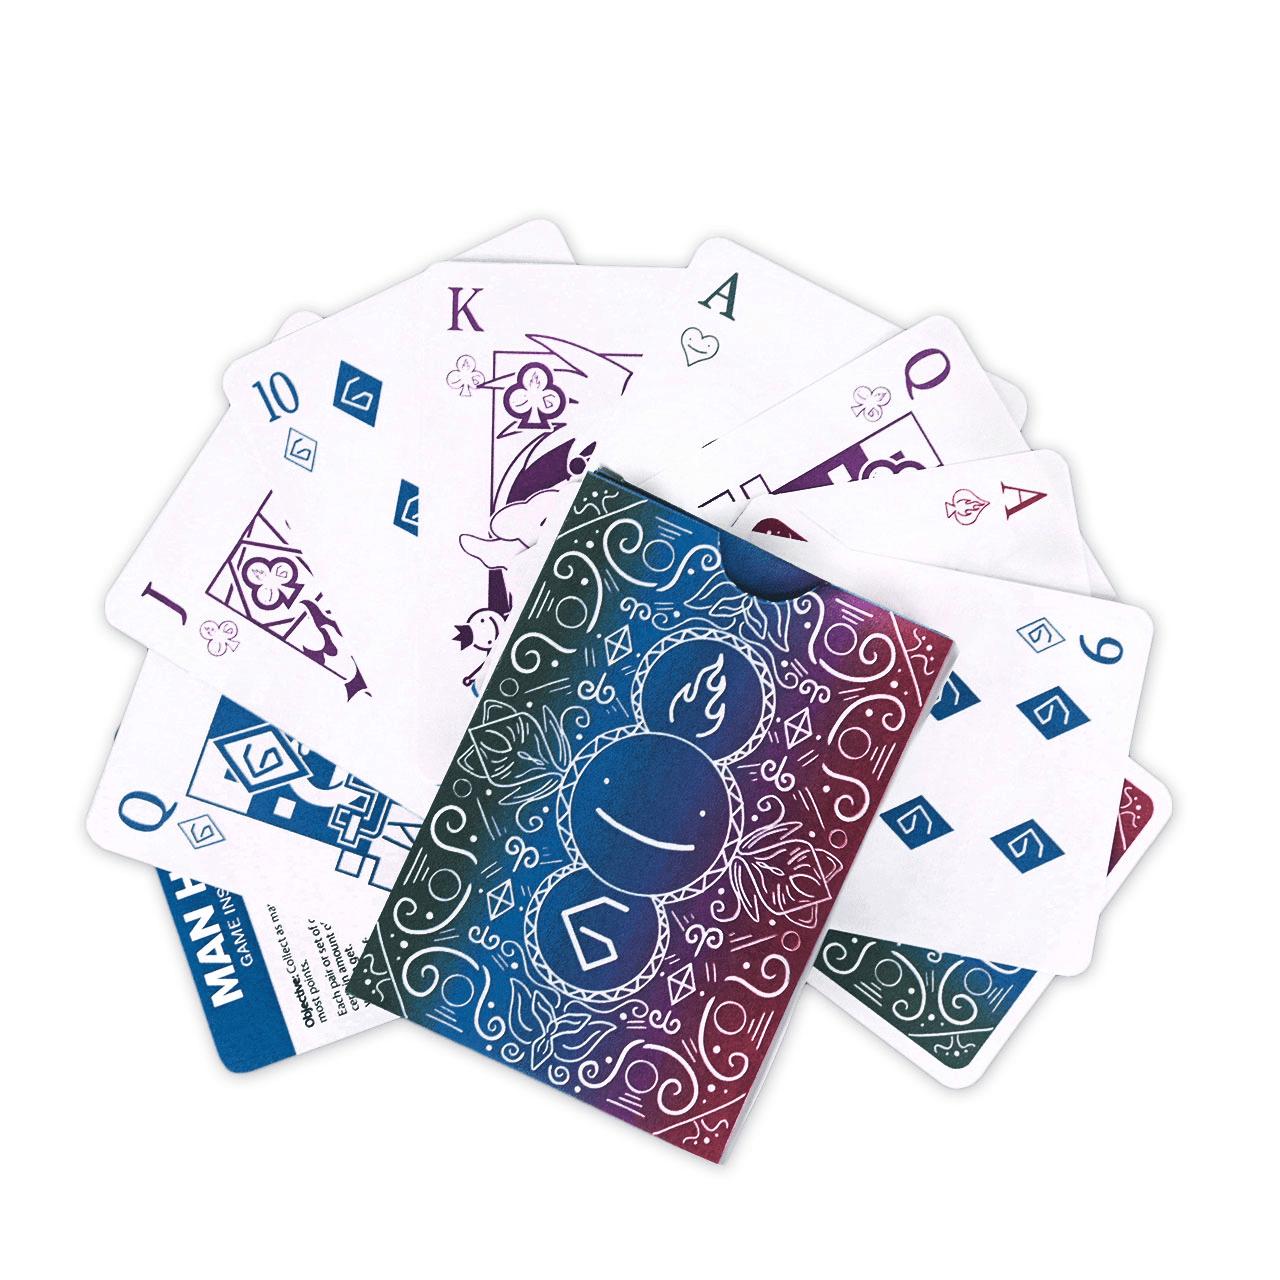 BFCM Dream Team 3 of a Kind Playing Cards and 3-Pack Button Bundle